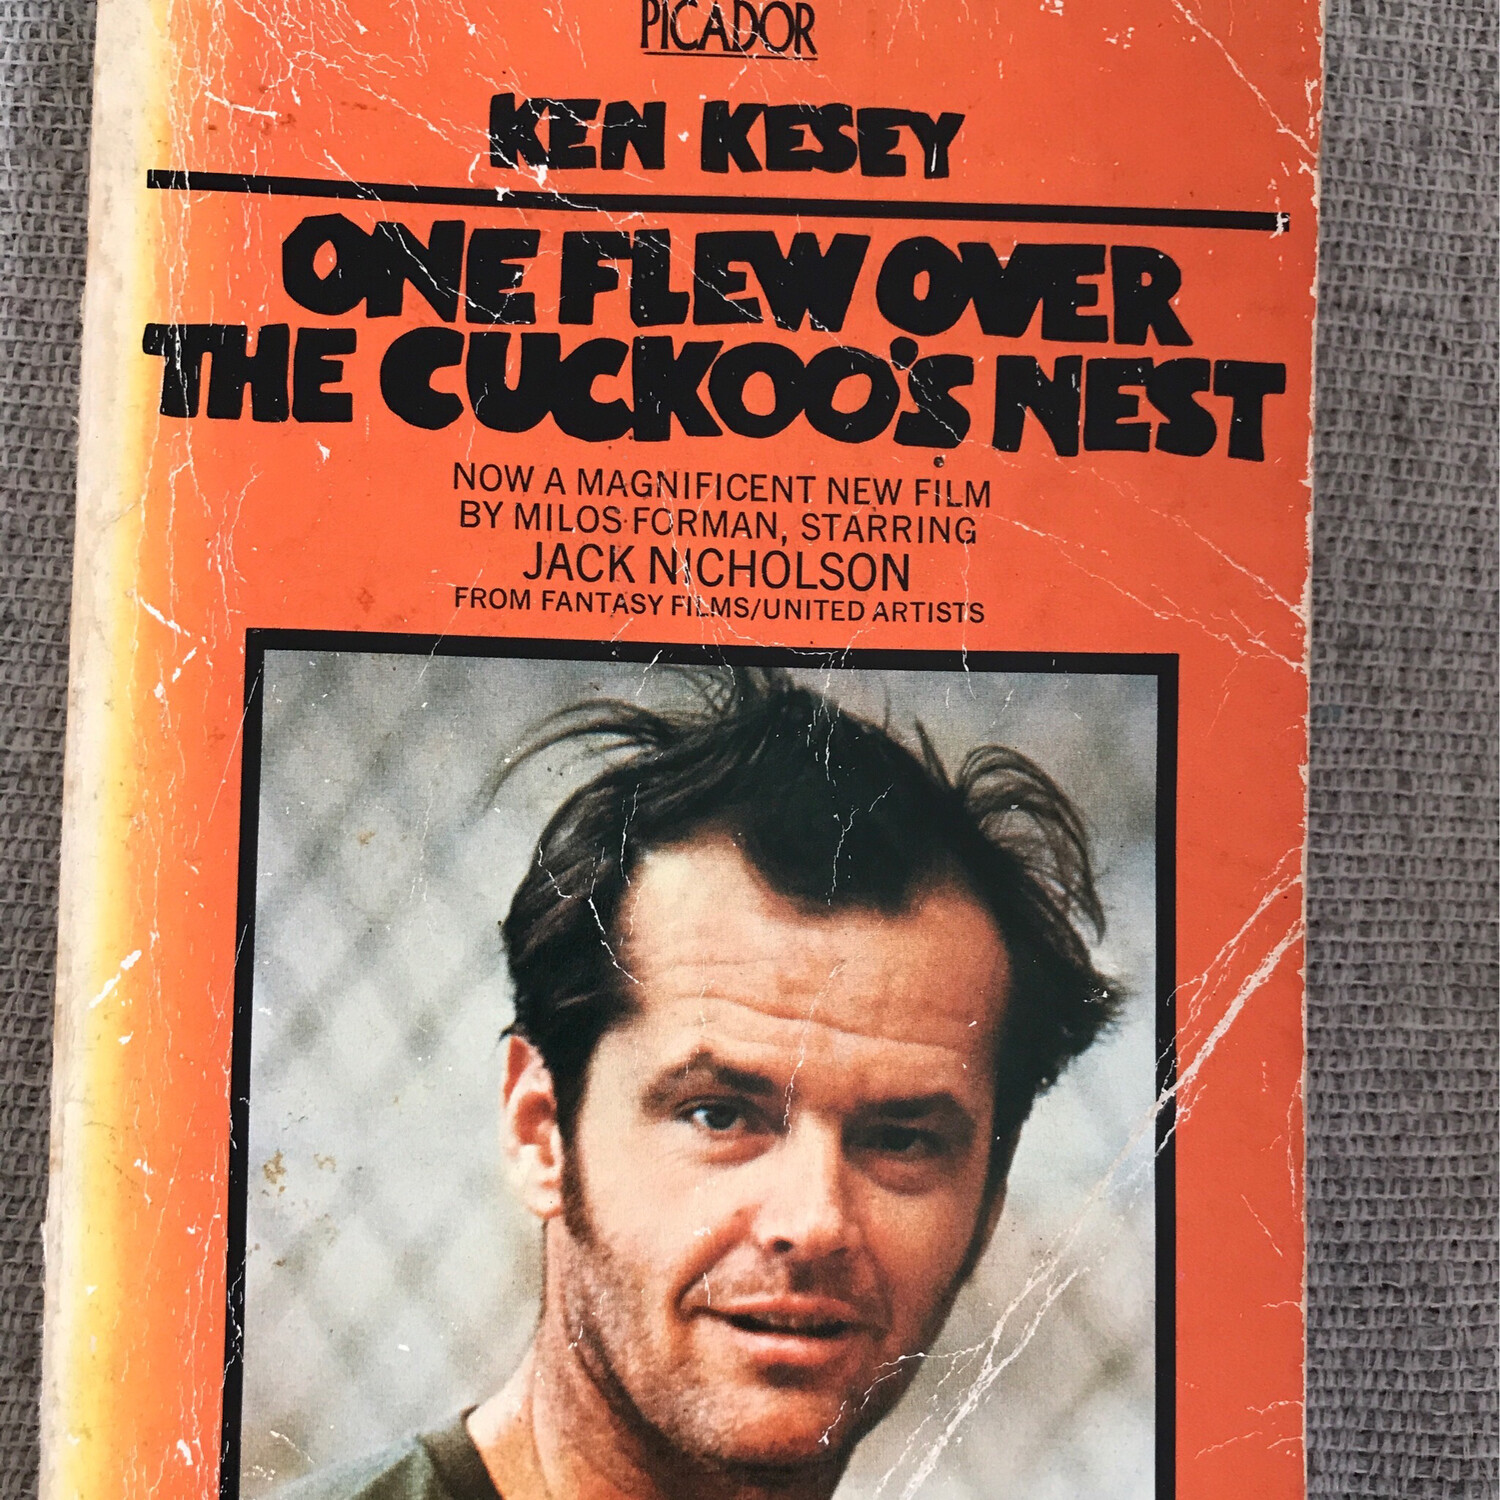 One Flew Over The Cuckoo’s Nest, Ken Kesey